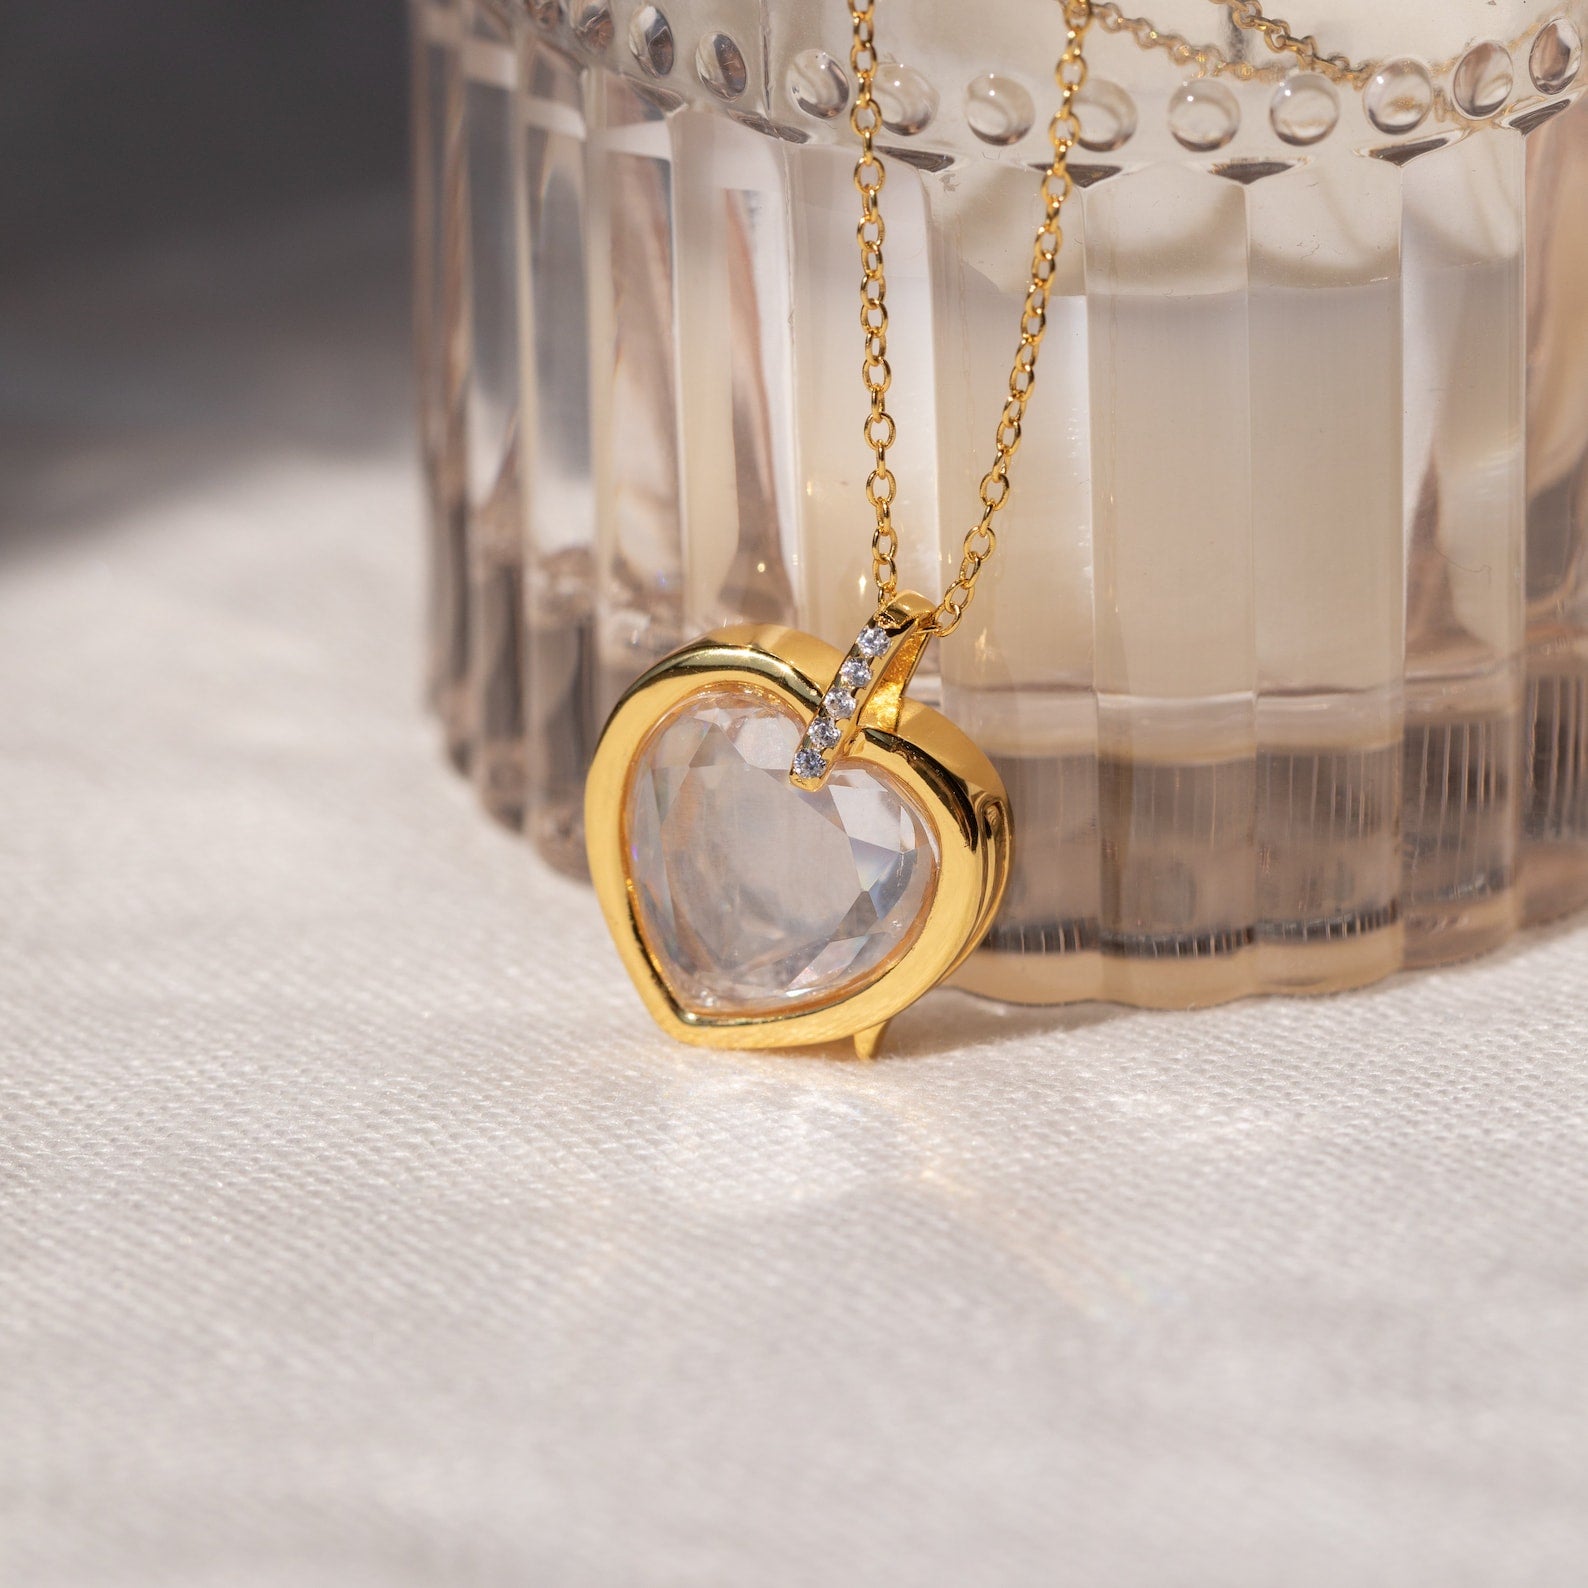 Sterling Silver Personalized Heart Locket Necklace | Ross-Simons